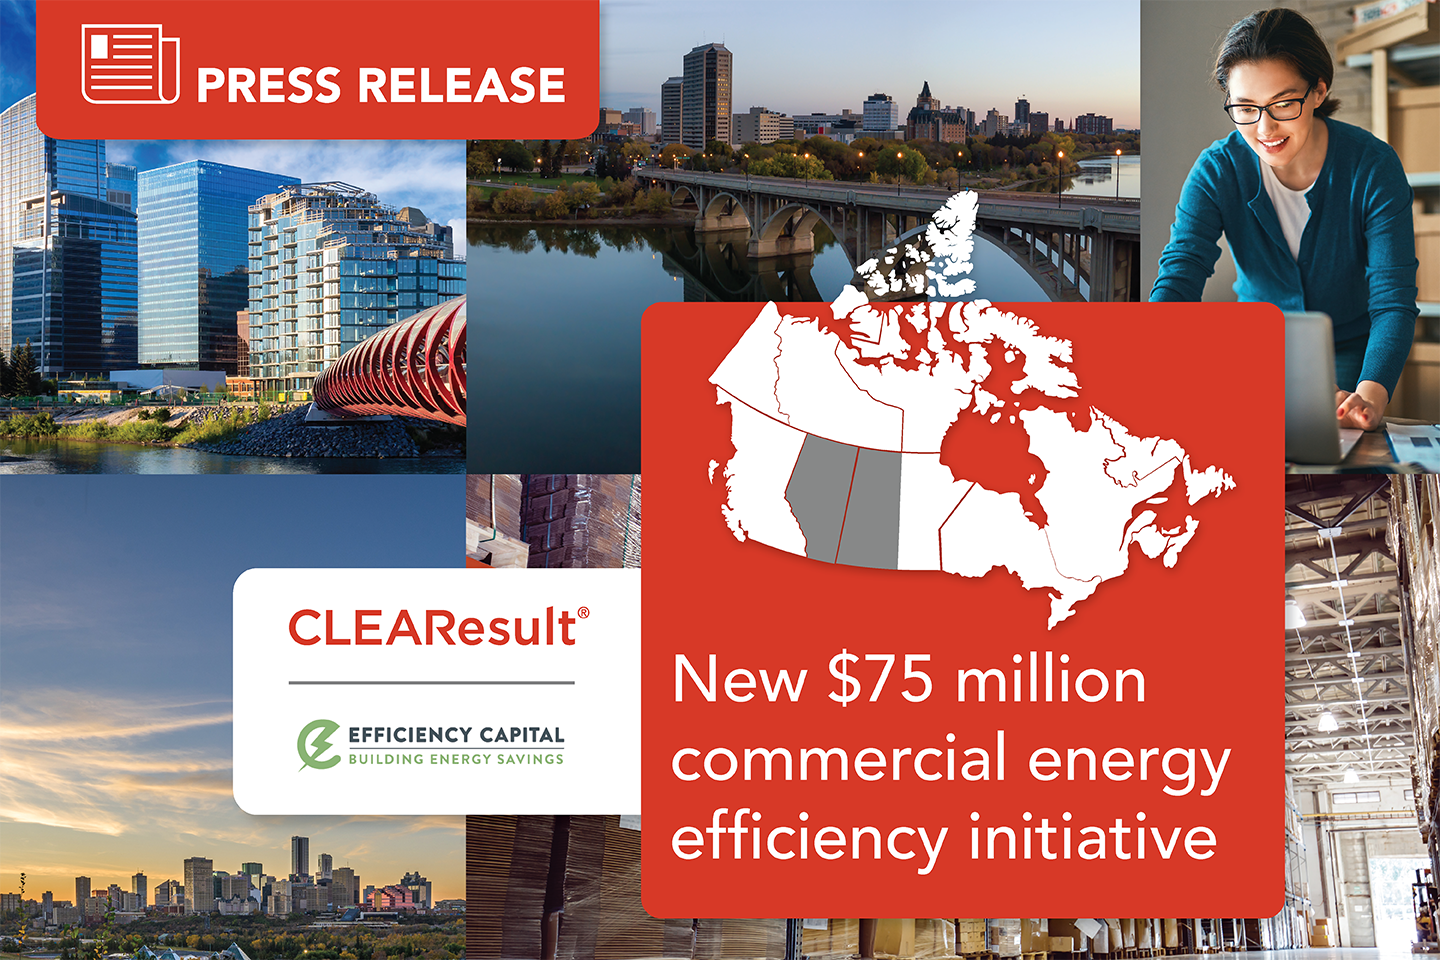 CLEAResult and Efficiency Capital Launch $75 Million Initiative for Commercial Energy Efficiency Upgrades